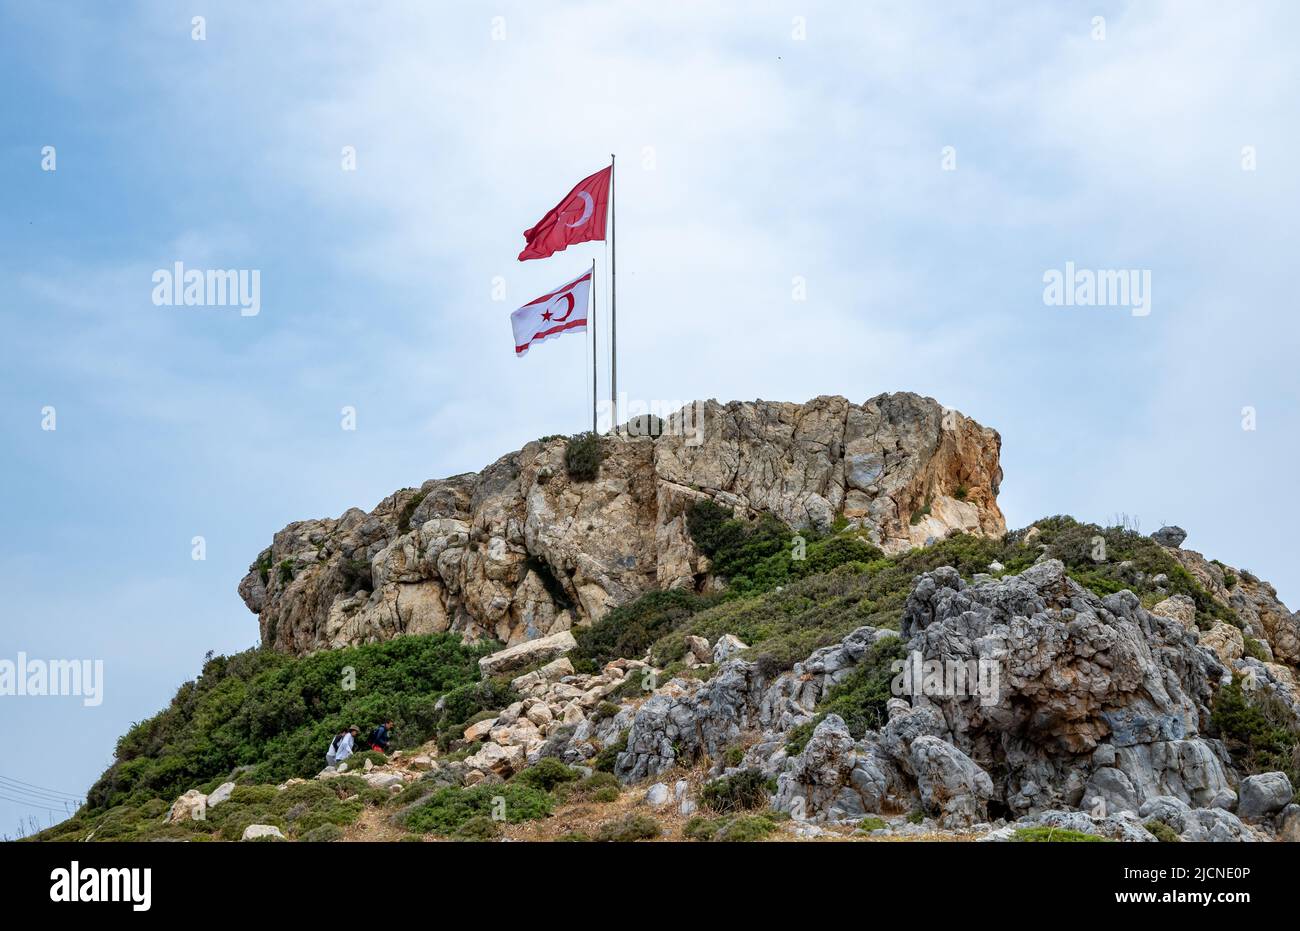 Turkish and Turkish Cyprus flags flying on the flagpole at the Cape Apostolos Andreas, eastern tip of the Cyprus island. Cyprus. Stock Photo